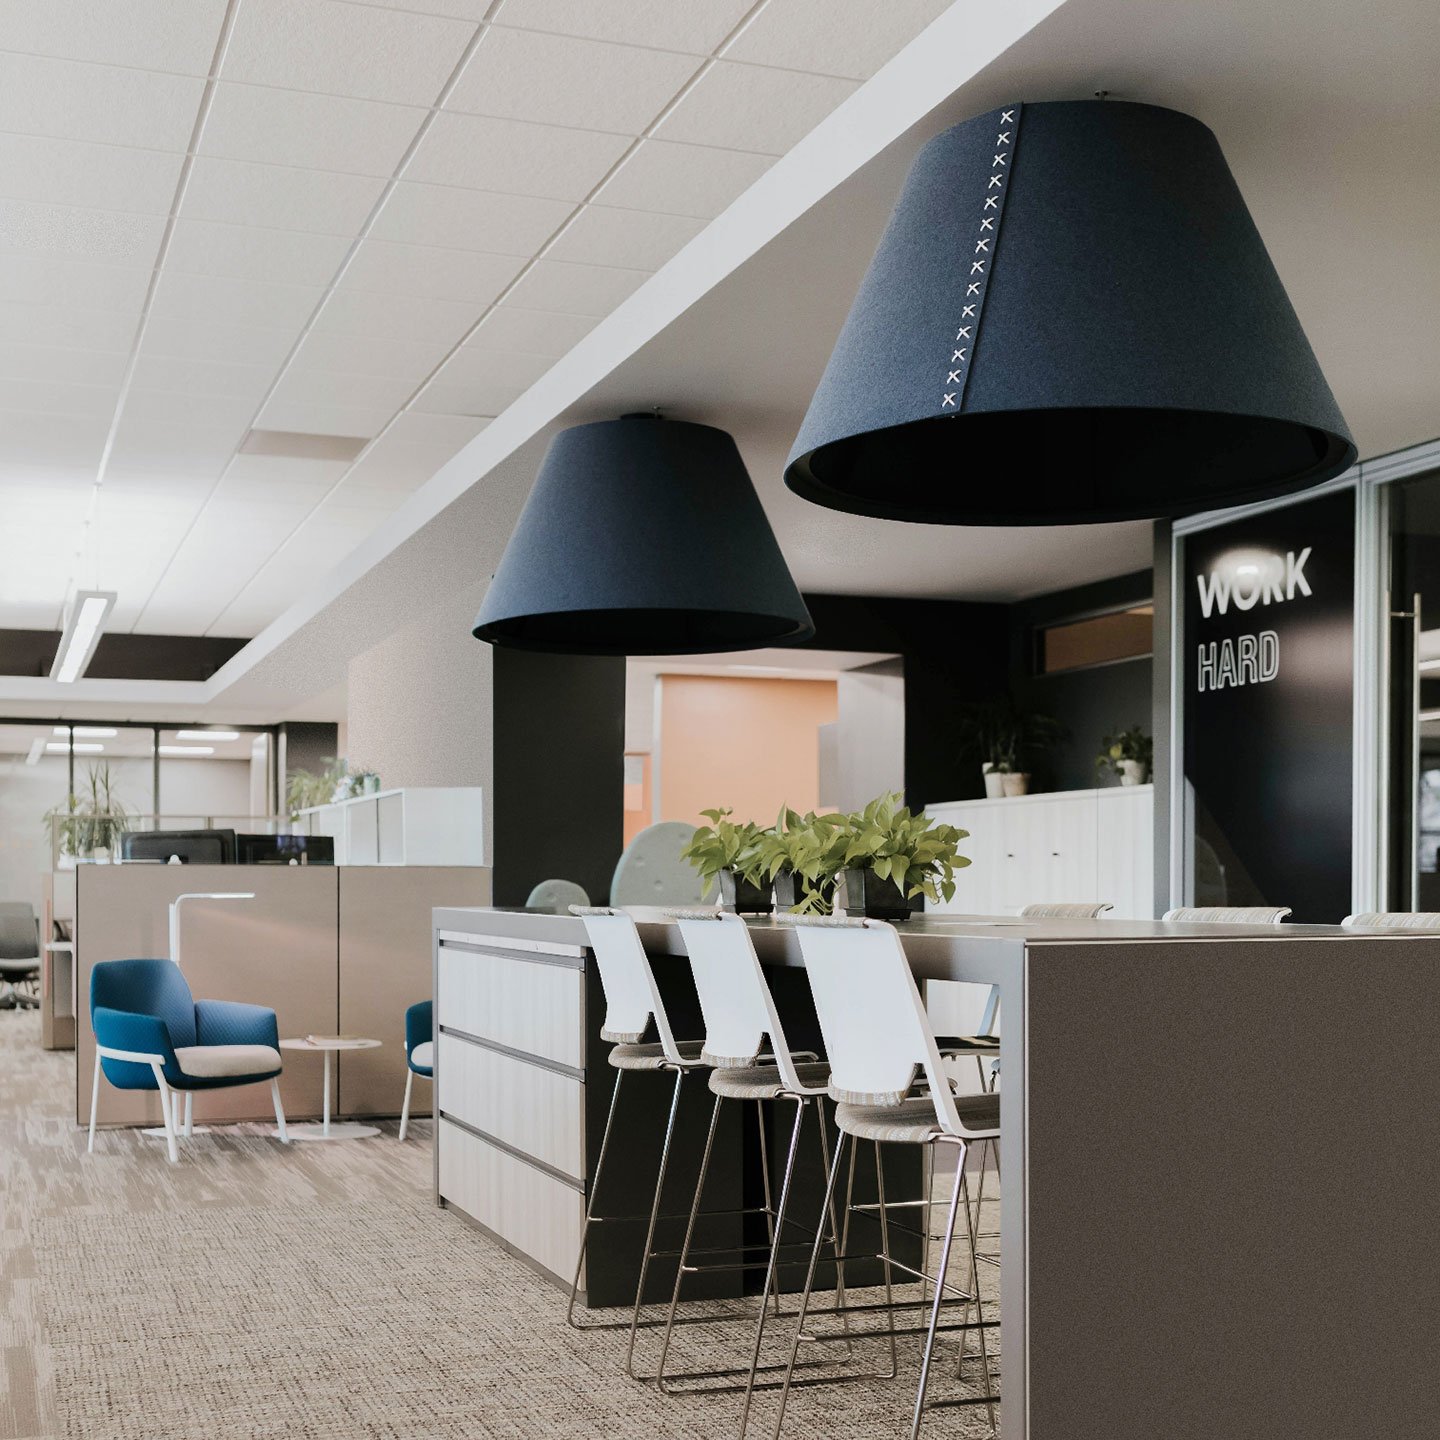 Haworth BuzziShade lighting in black above office collaboration area in open office setting